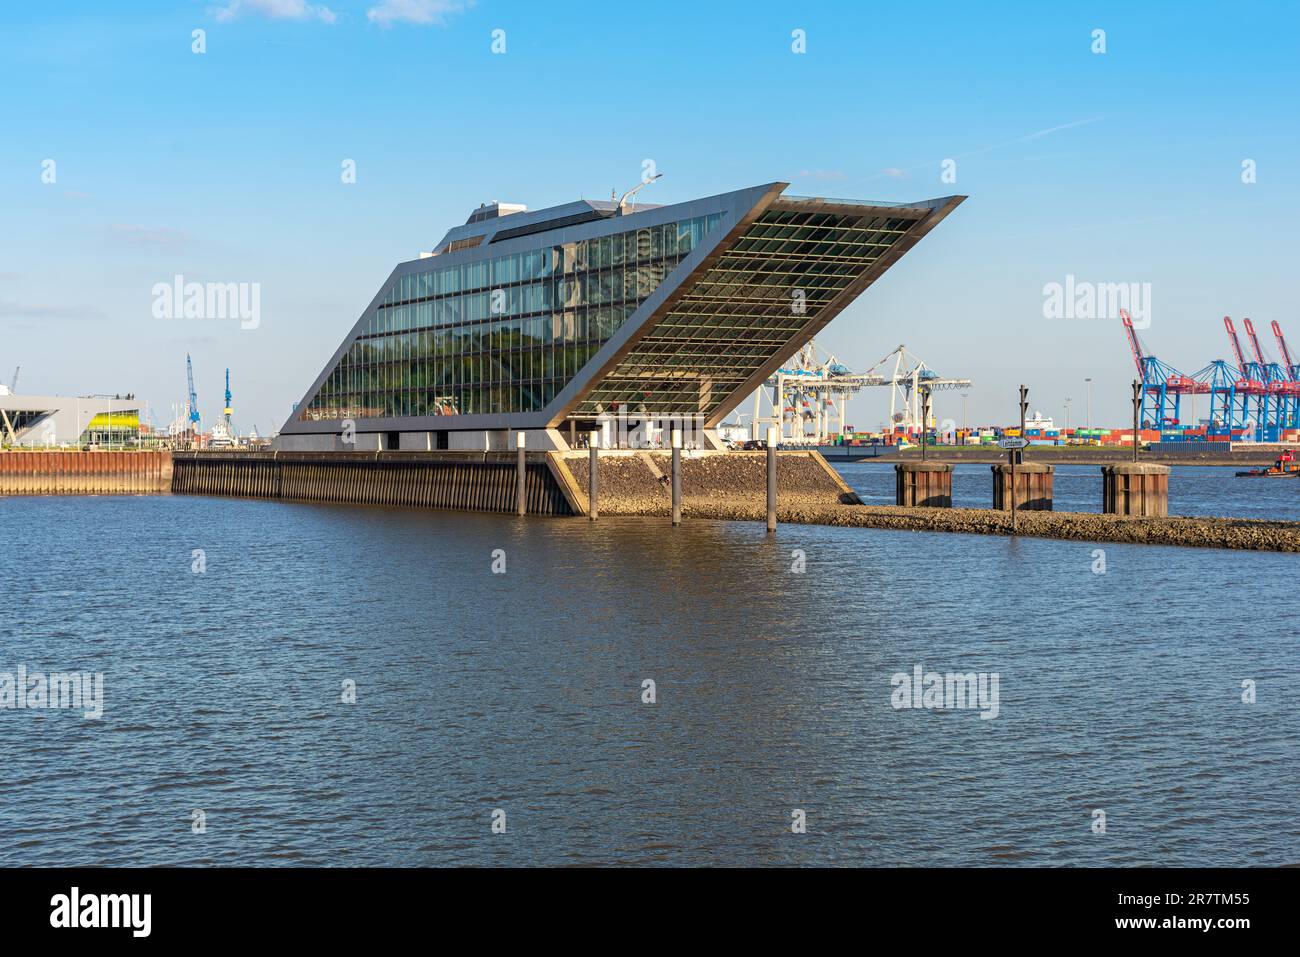 The Dockland in Hamburg Altona developed in the old fishing port in Hamburg. The six-story building in the shape of a parallelogram and juts out over Stock Photo